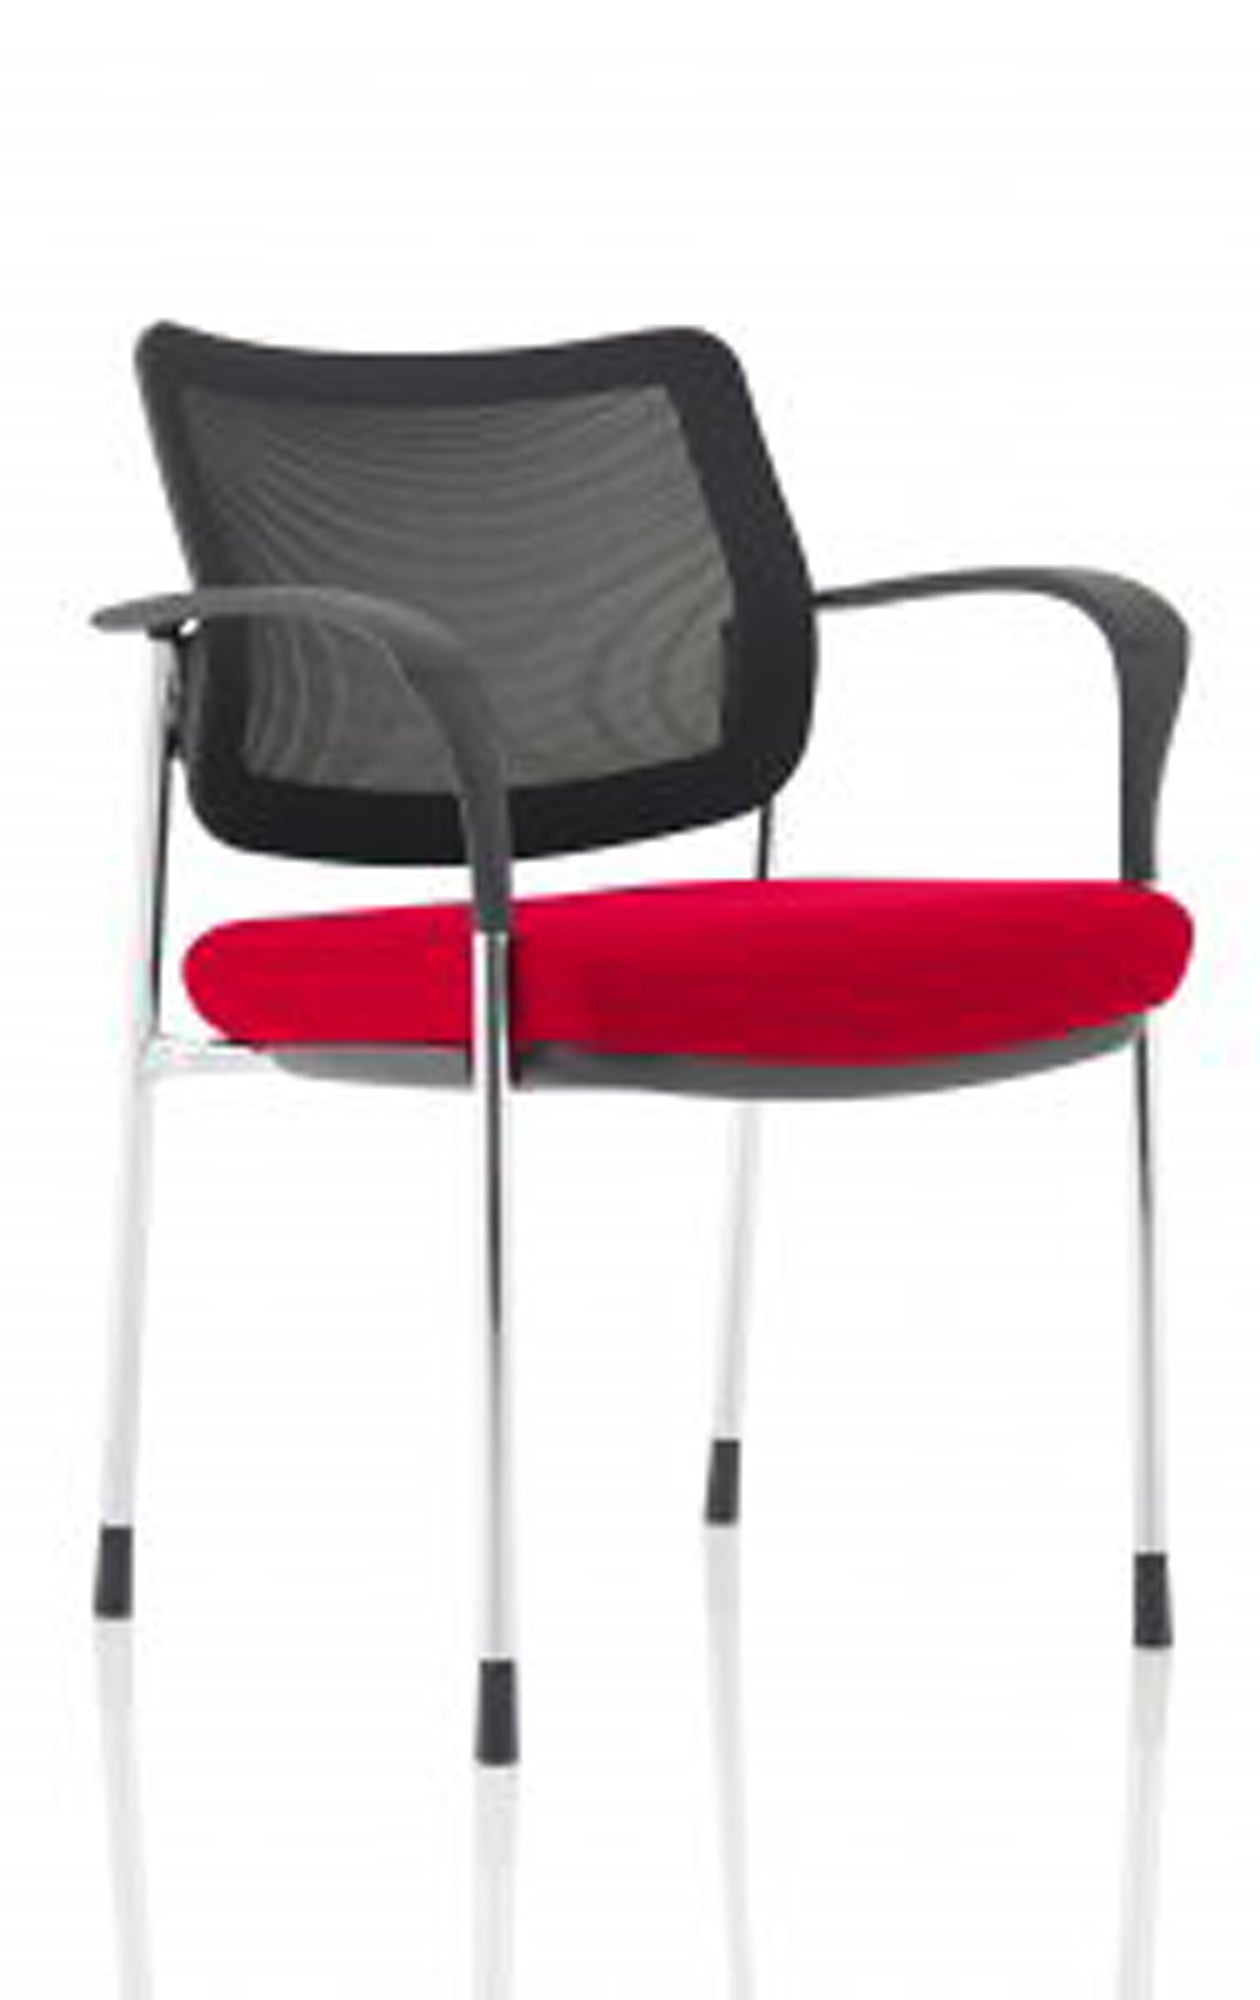 Brunswick Deluxe Medium Back Stacking Visitor Office Chair with Arms Bespoke